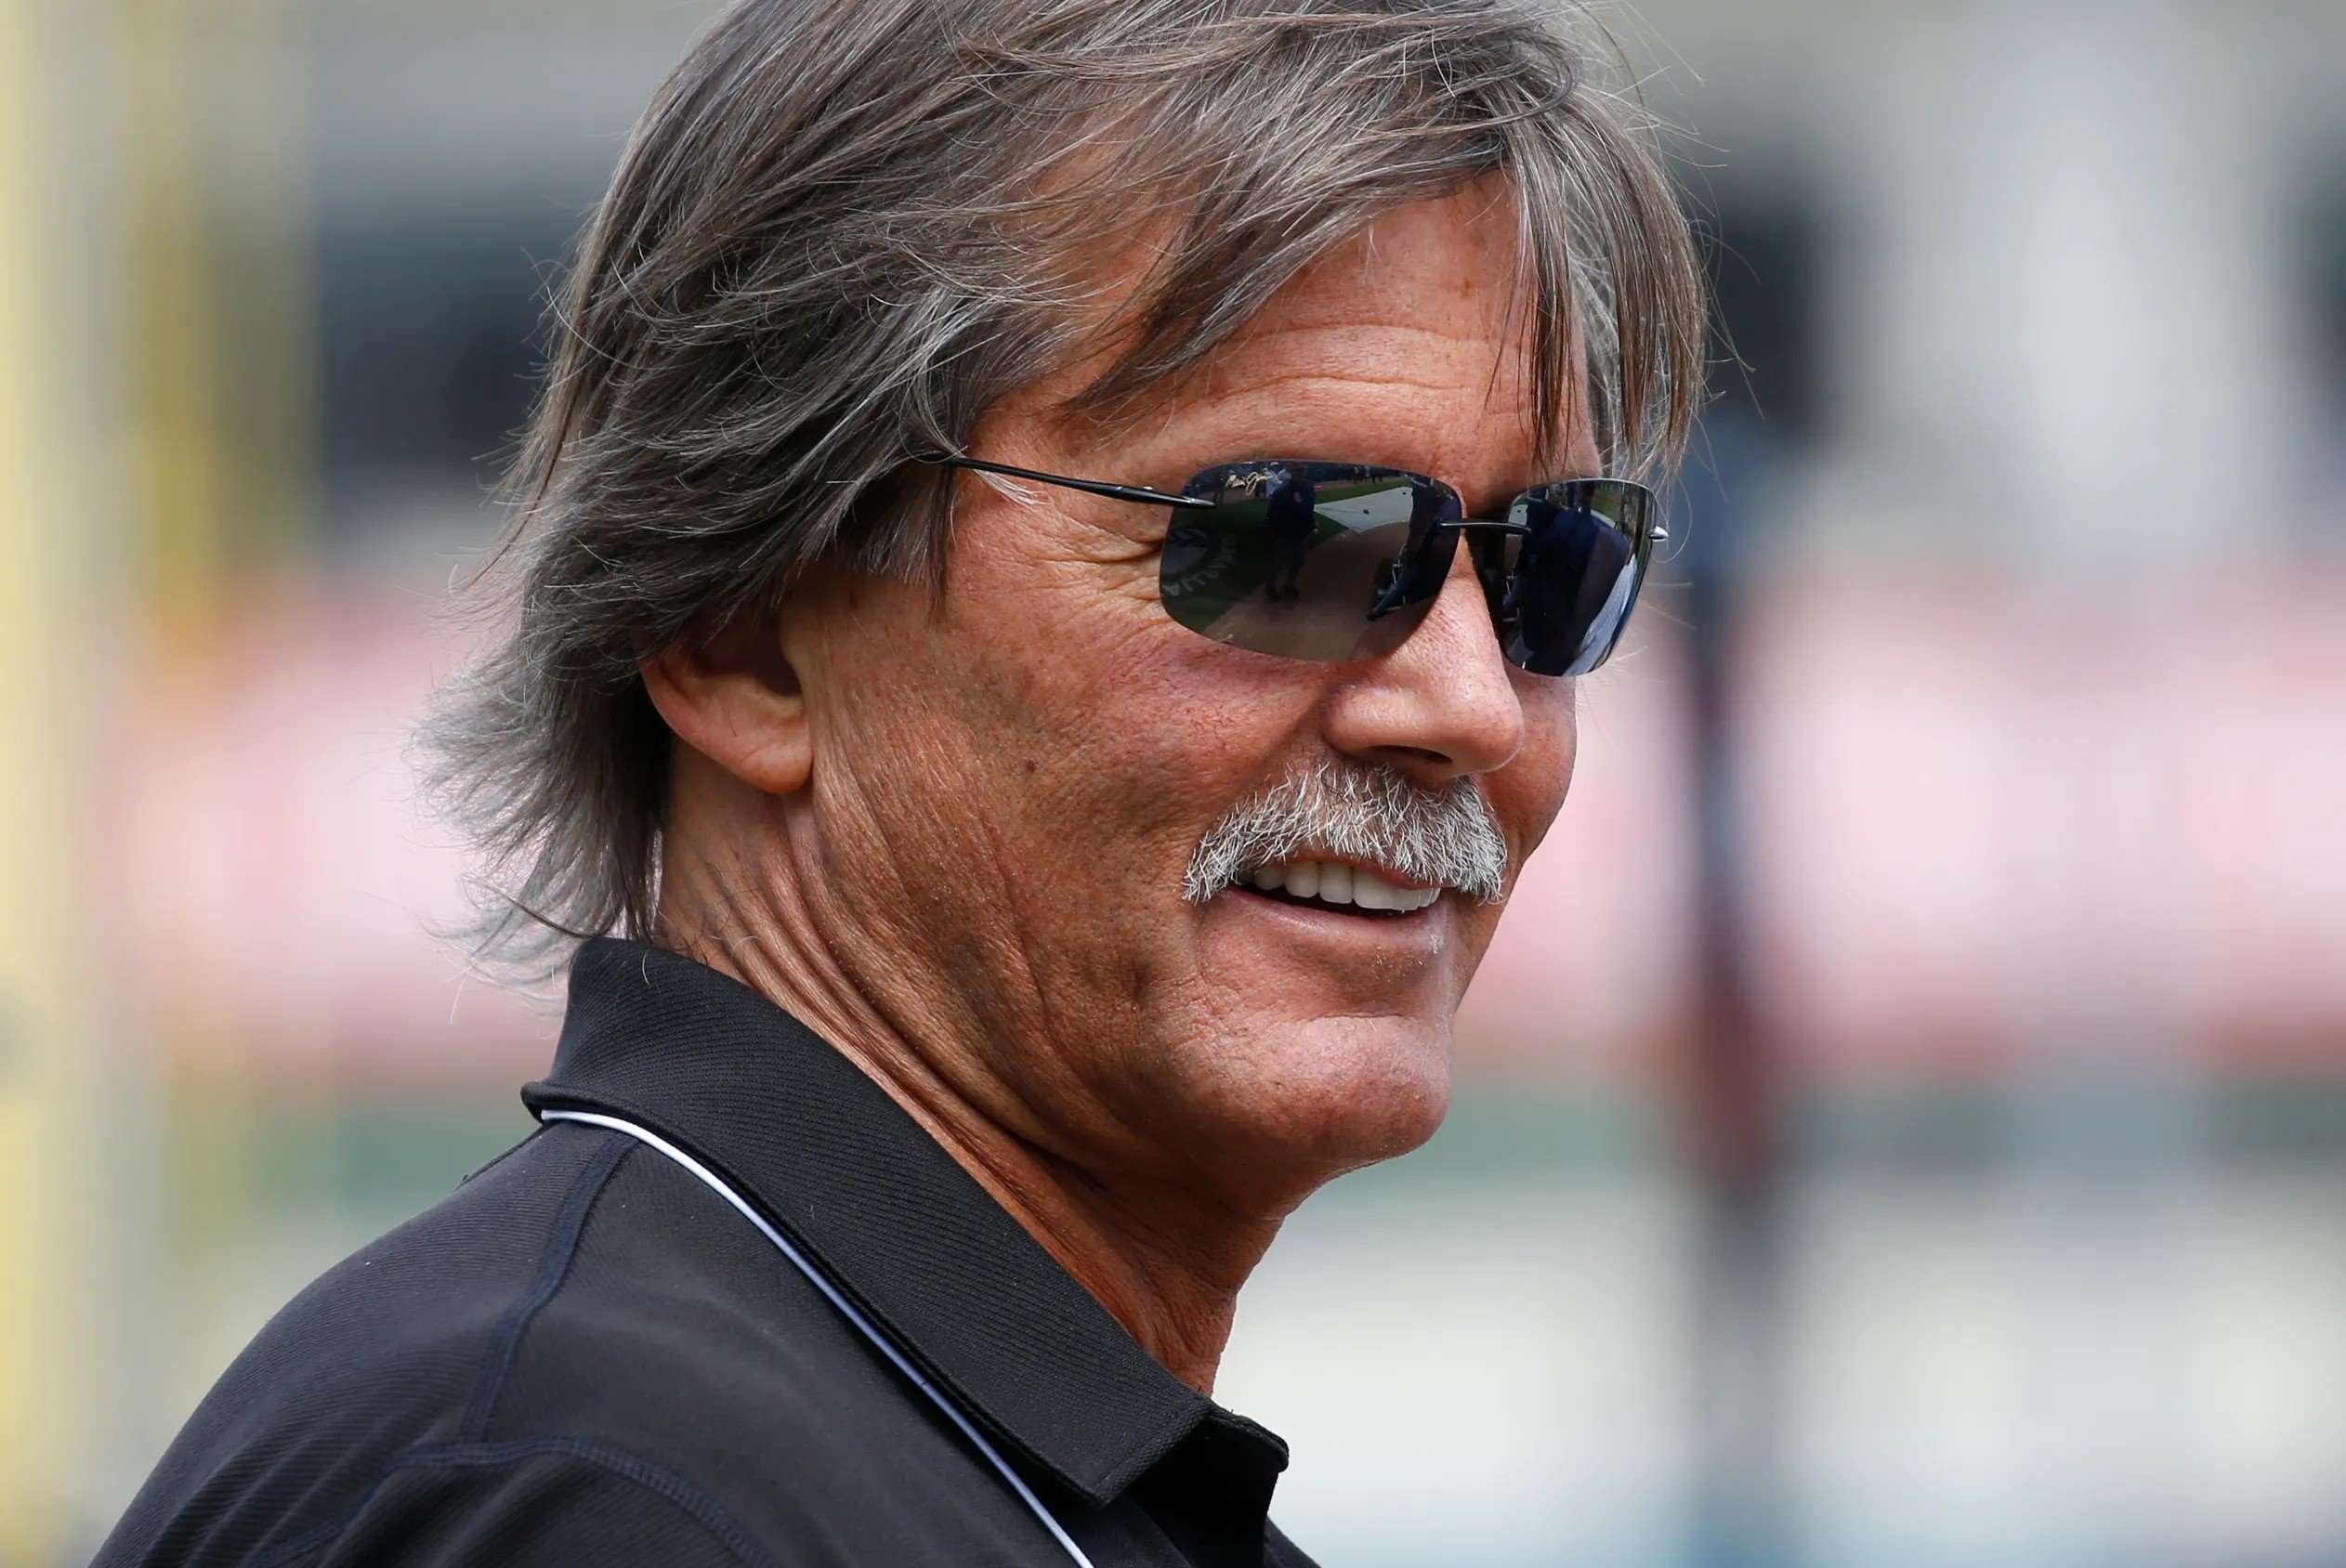 Dennis Eckersley: 5 Fast Facts You Need to Know